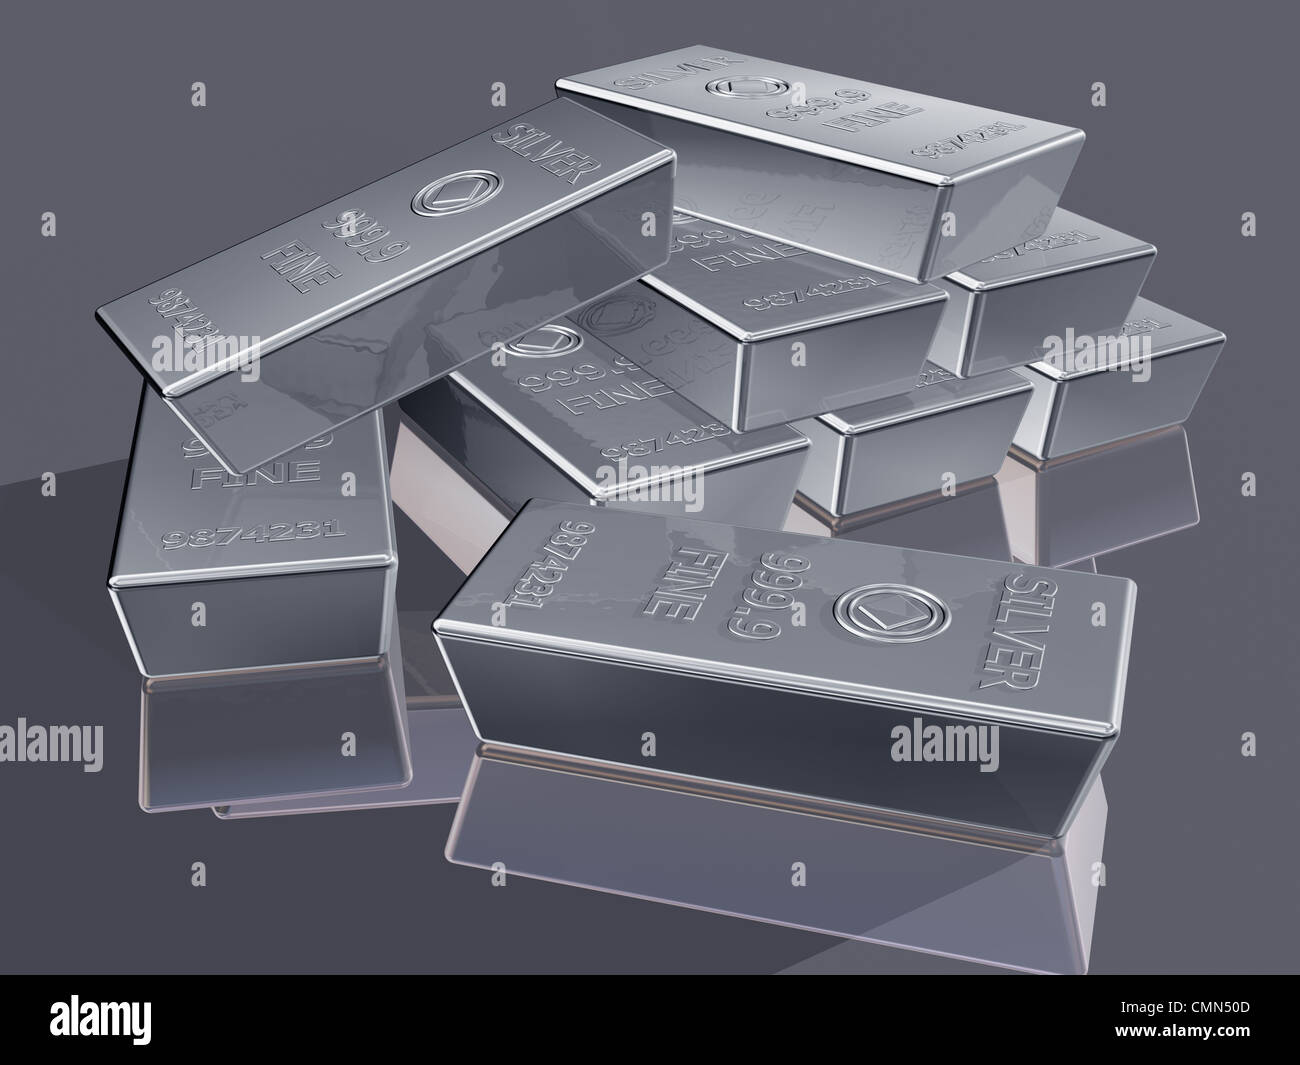 Illustration of silver reserves piled in a stack Stock Photo